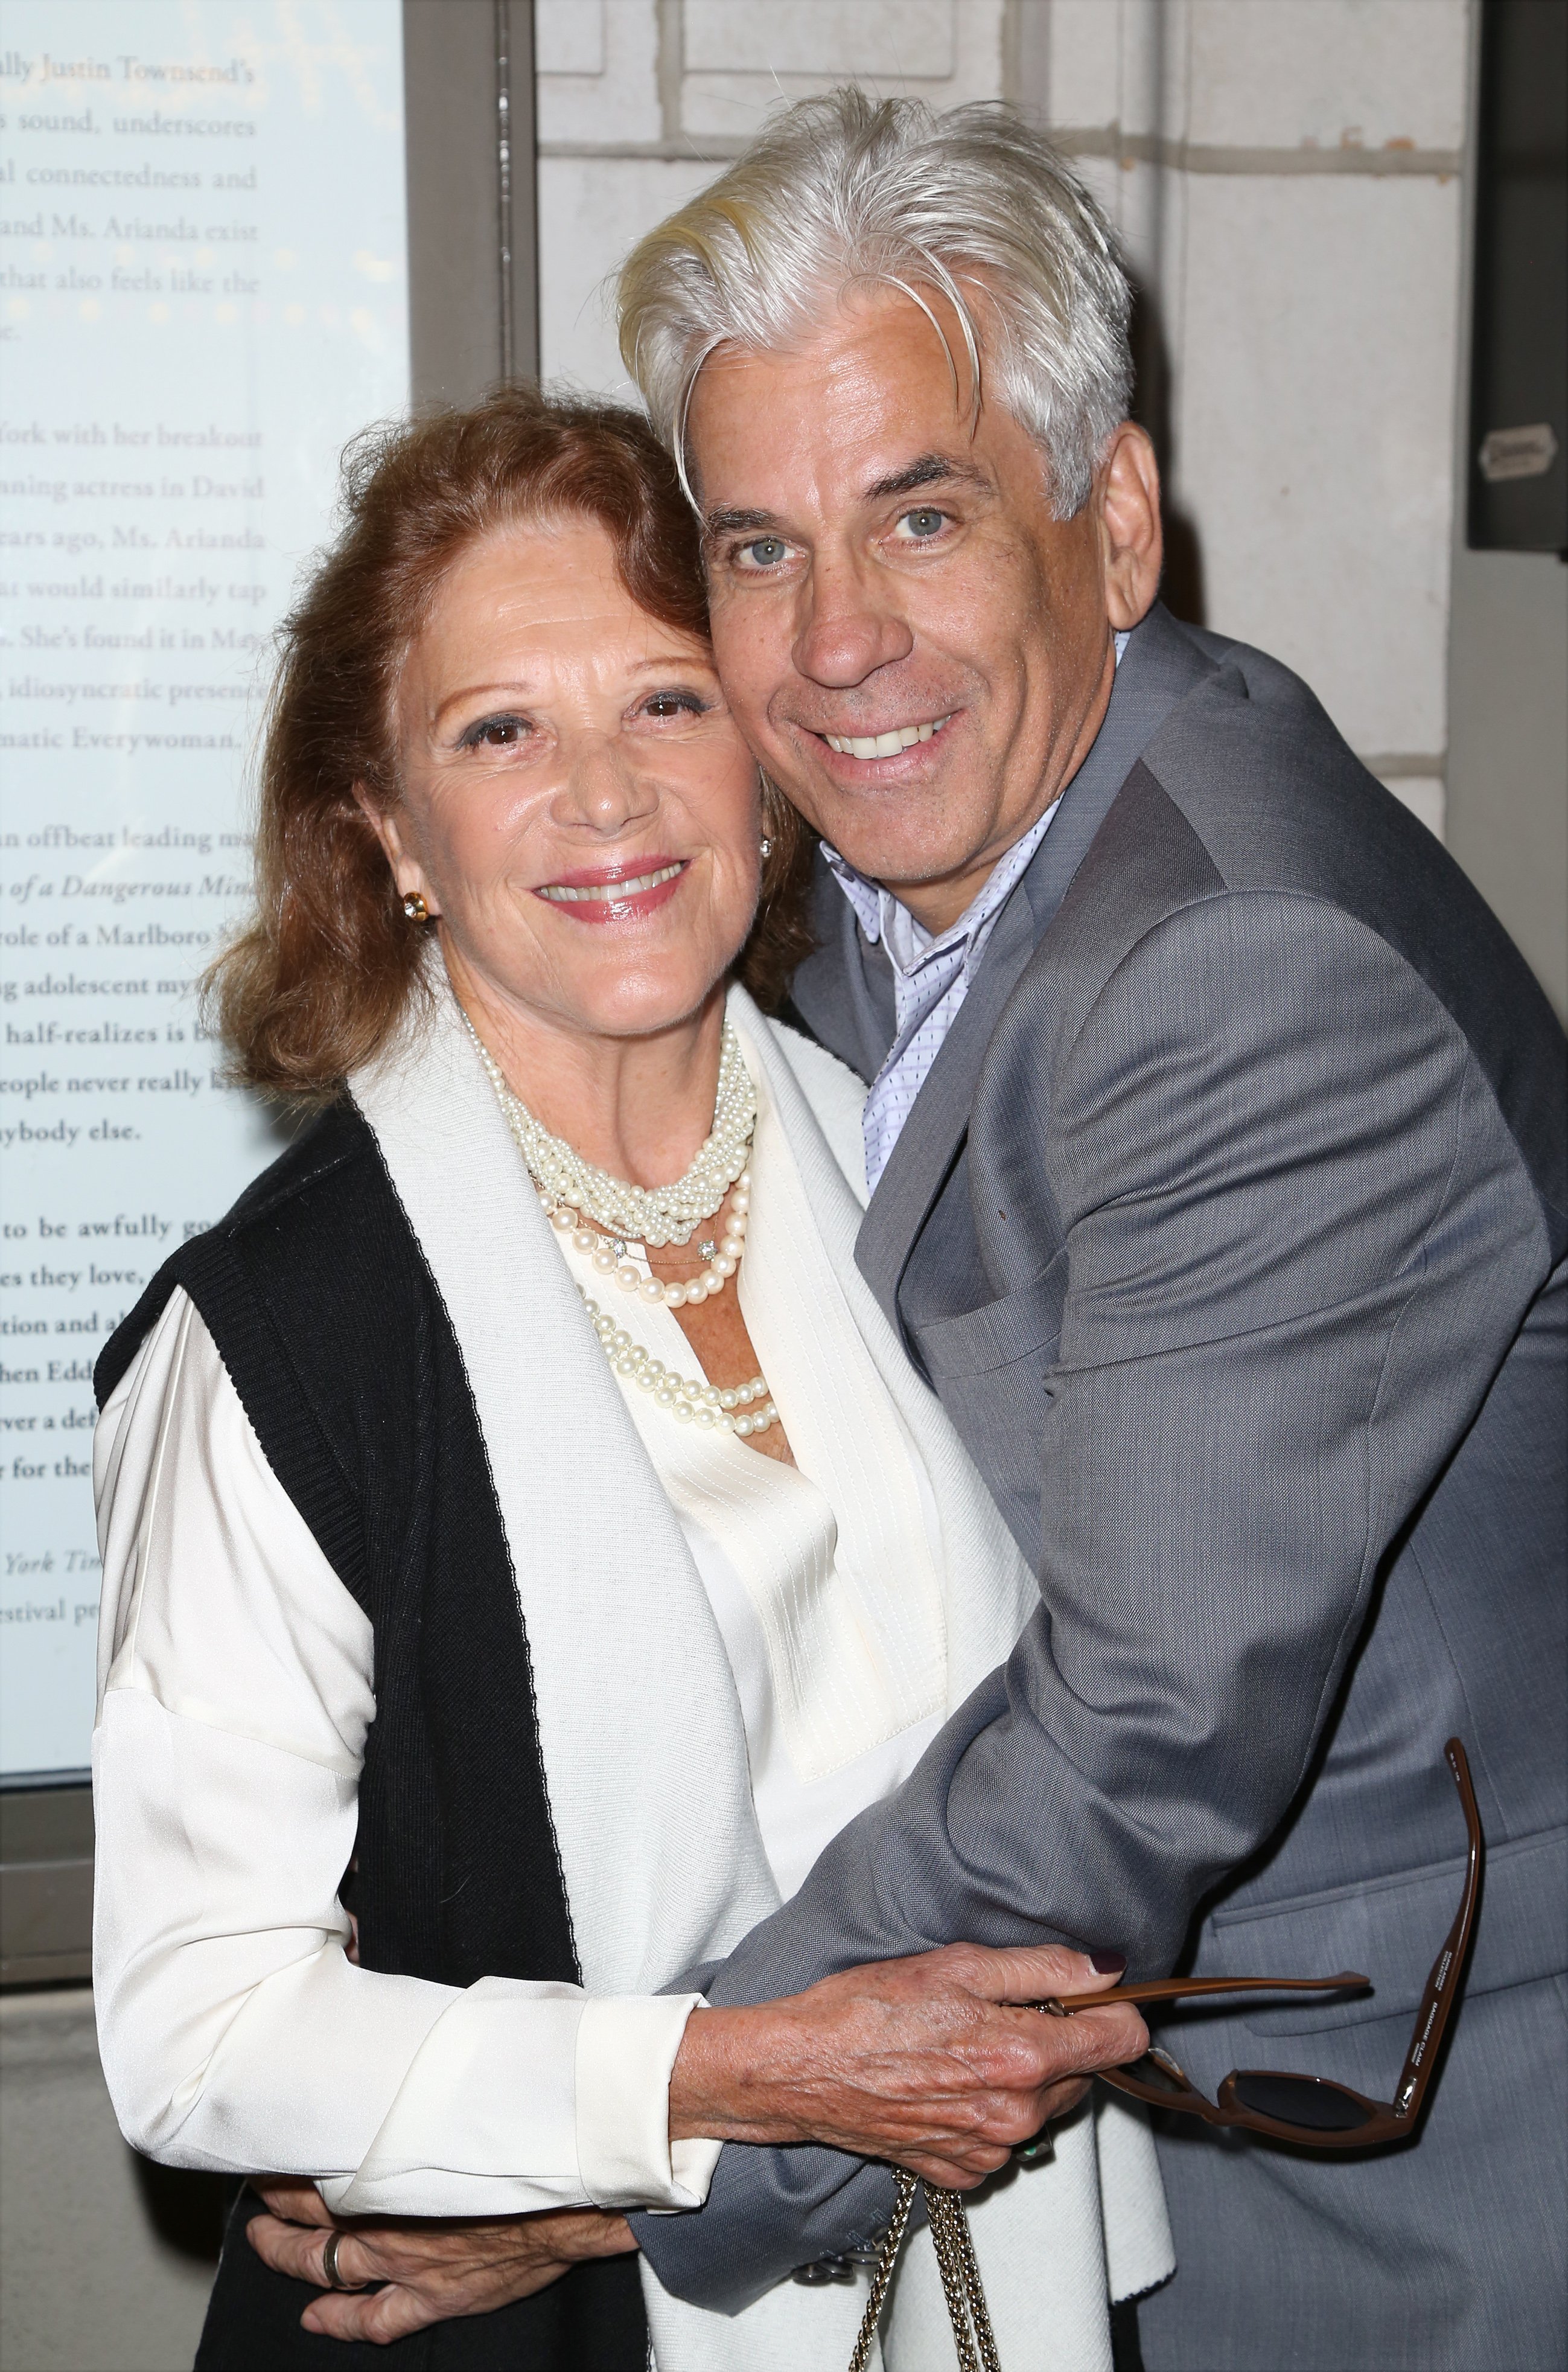 Linda Lavin and her husband Steve Bakunas attend the Broadway Opening Night performance of 'Fool For Love' at the Samuel J. Friedman Theatre on October 8, 2015 in New York City. | Source: Getty Images